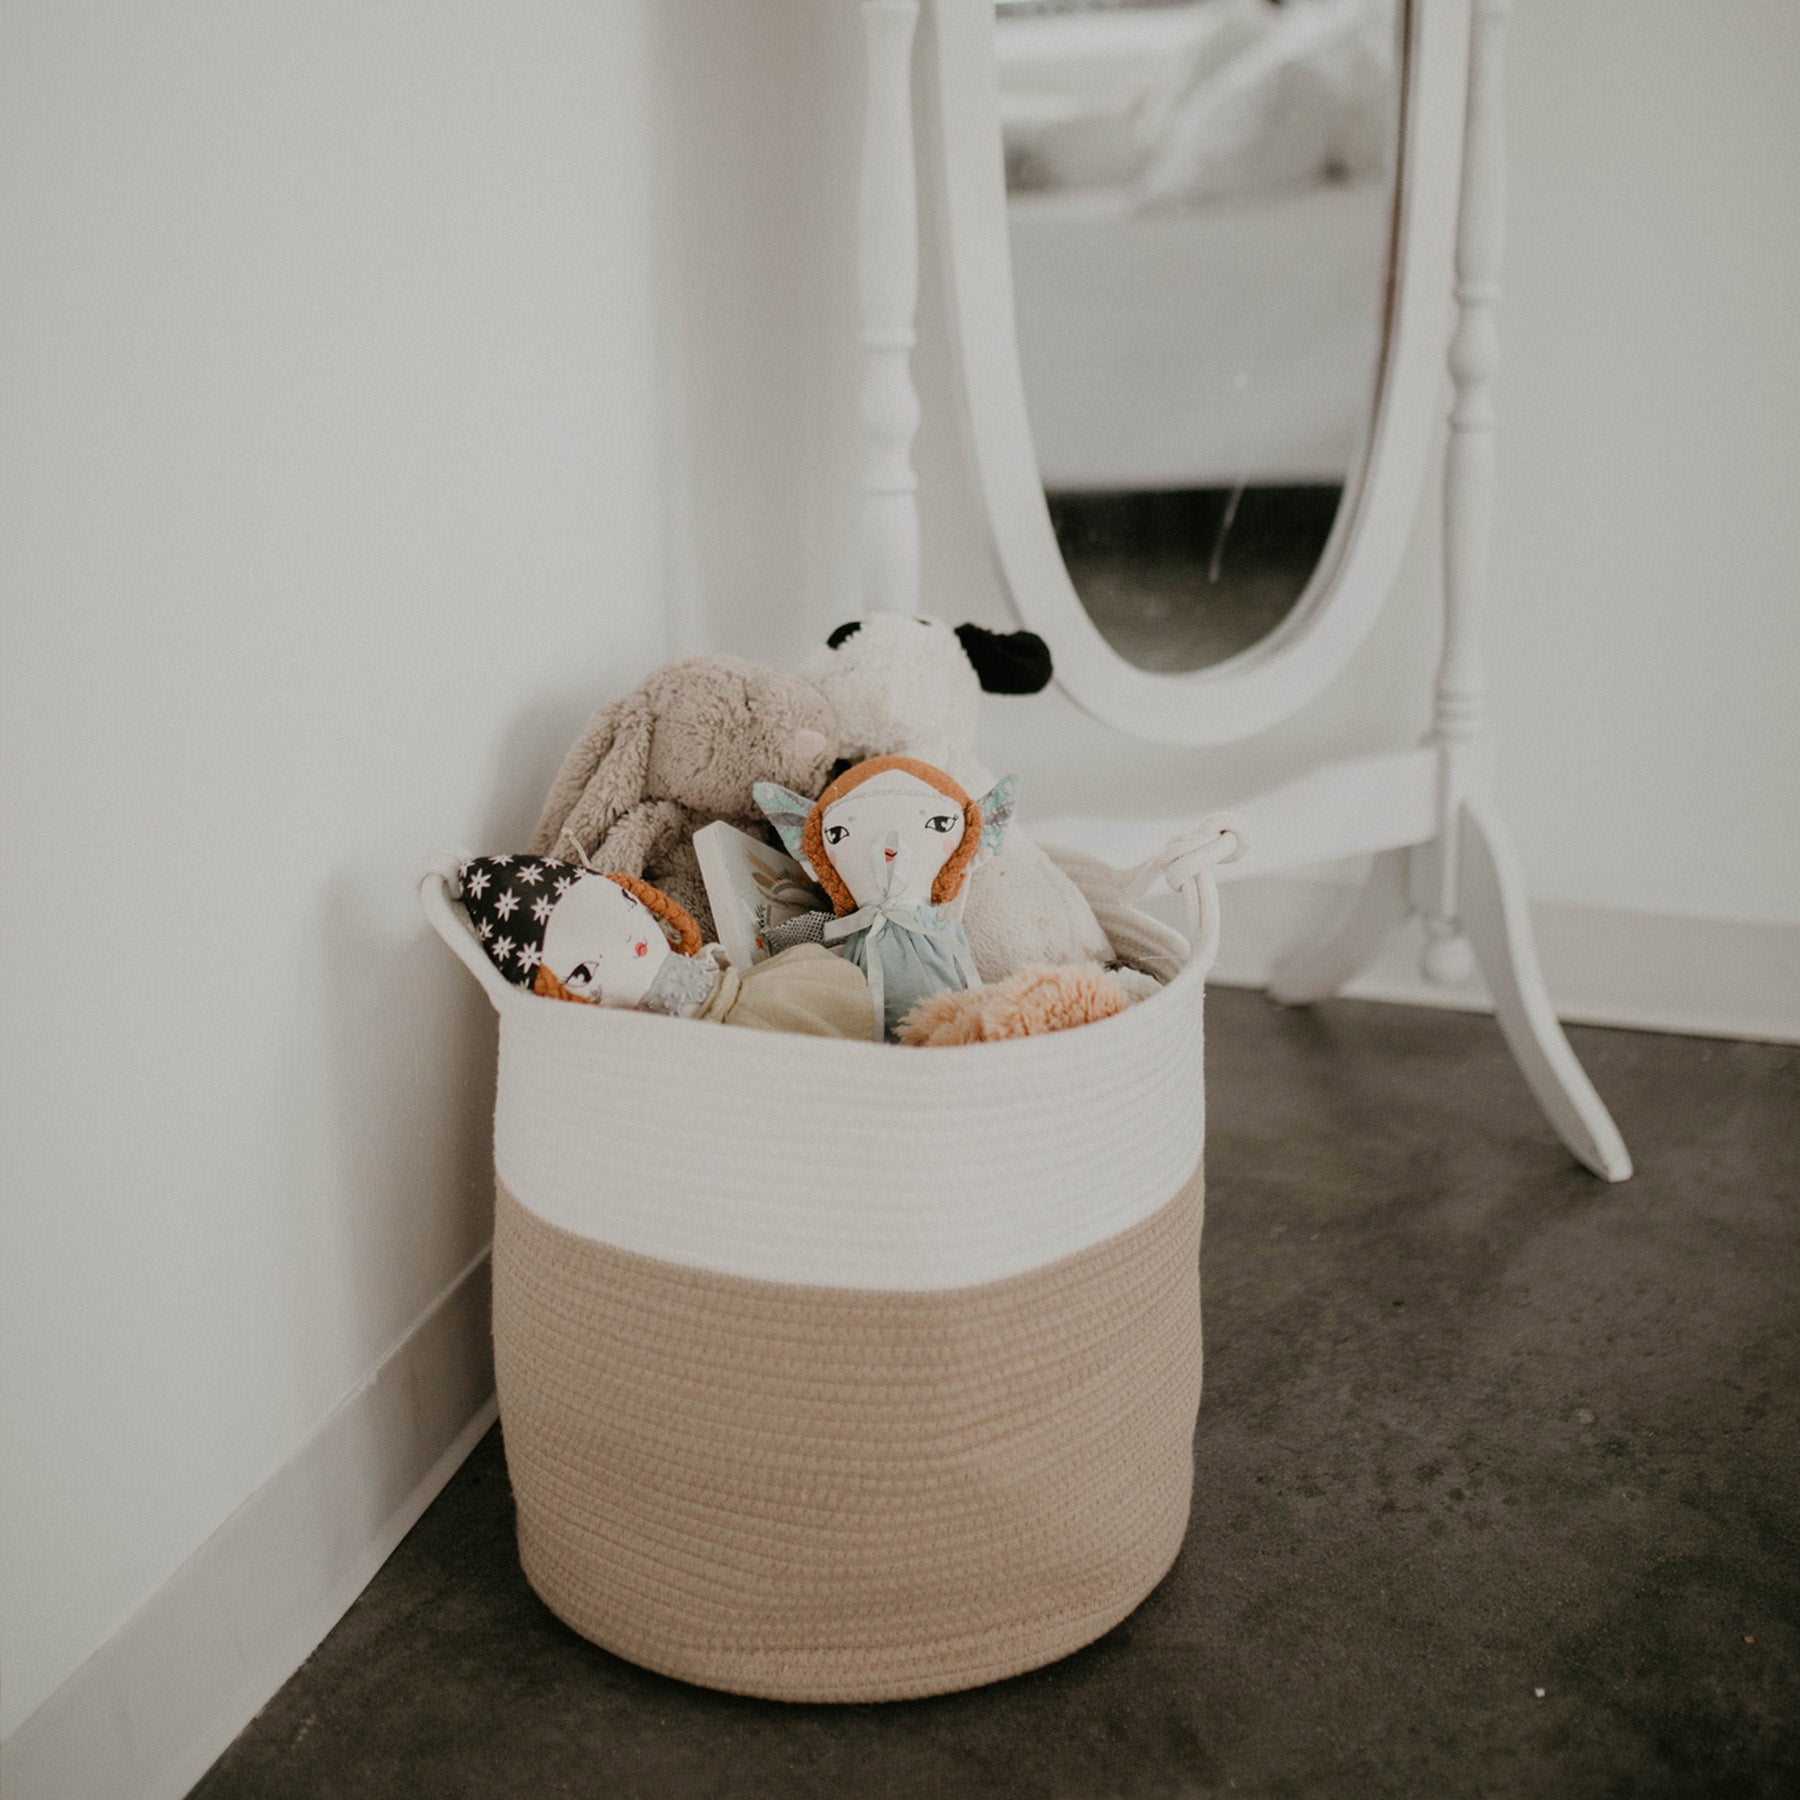 Chaos Control Episode 3: Organize Your Home with THIS Basket...